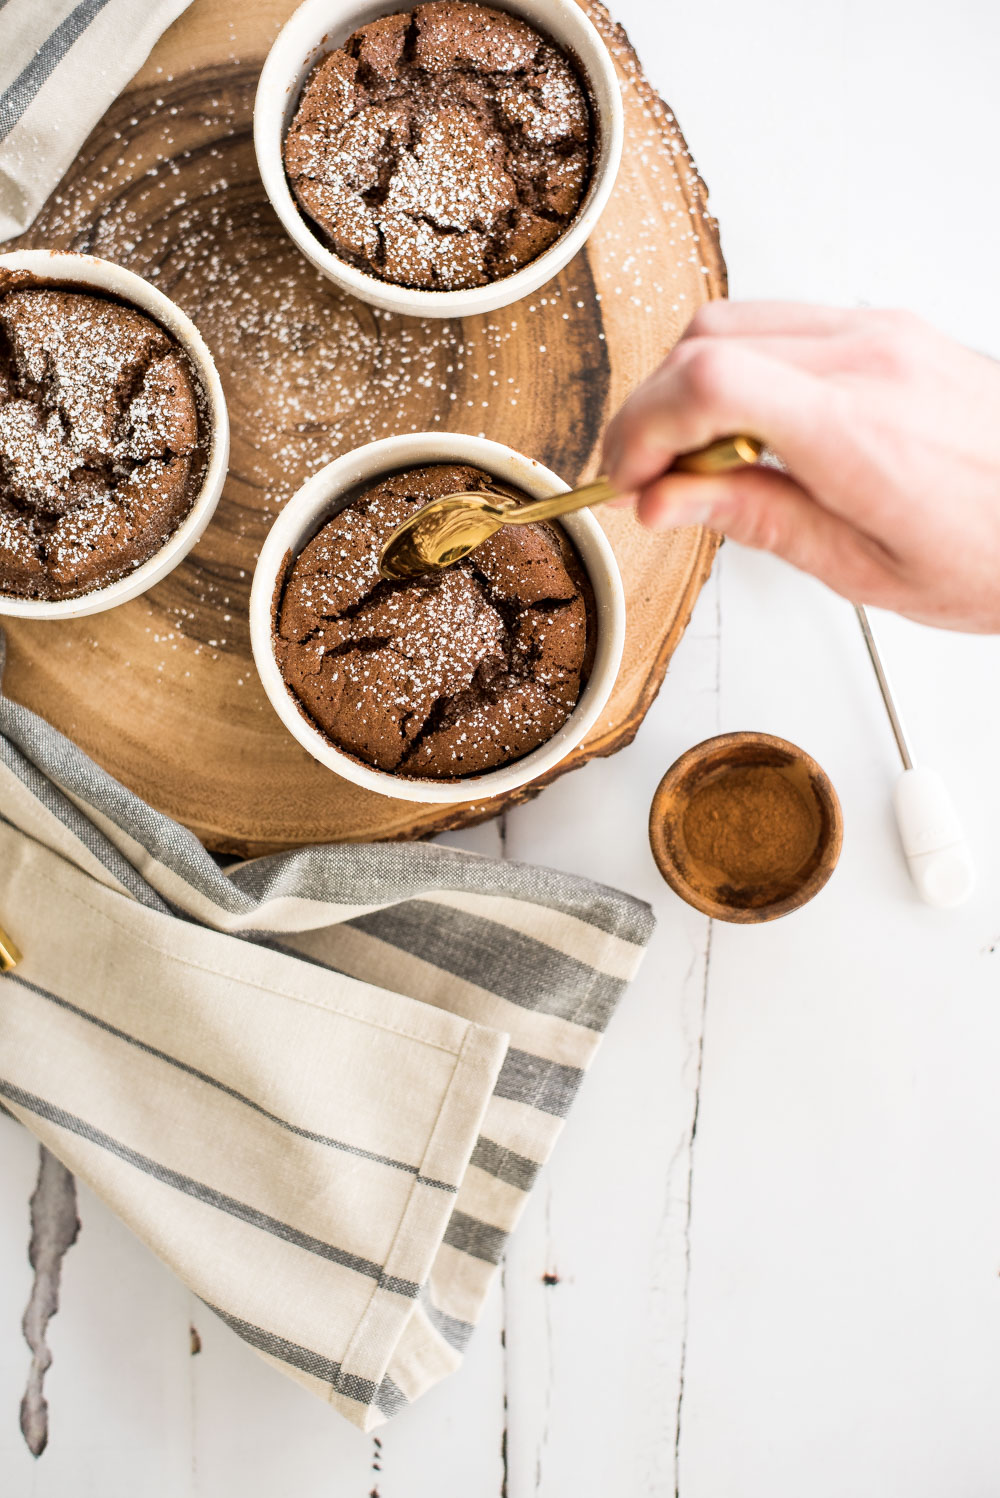 Easy cinnamon chocolate soufflés are nothing to be scared of. Soufflés are actually very simple once you get the technique down, so give this recipe a try!